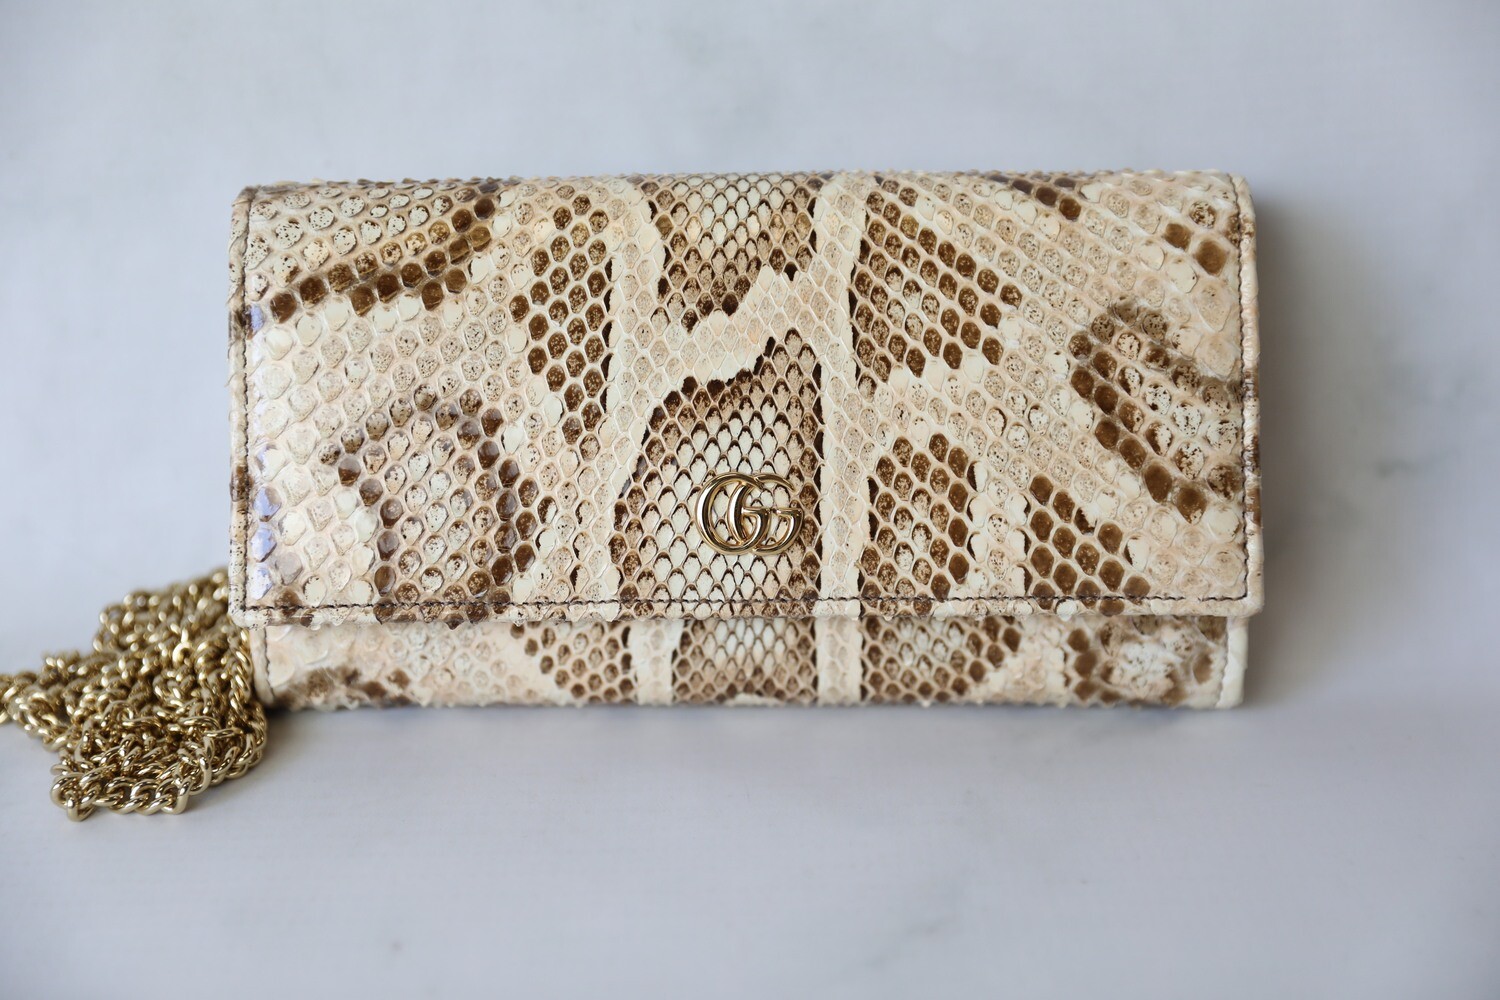 Gucci - Authenticated Marmont Wallet - Python Brown Snakeskin for Women, Good Condition